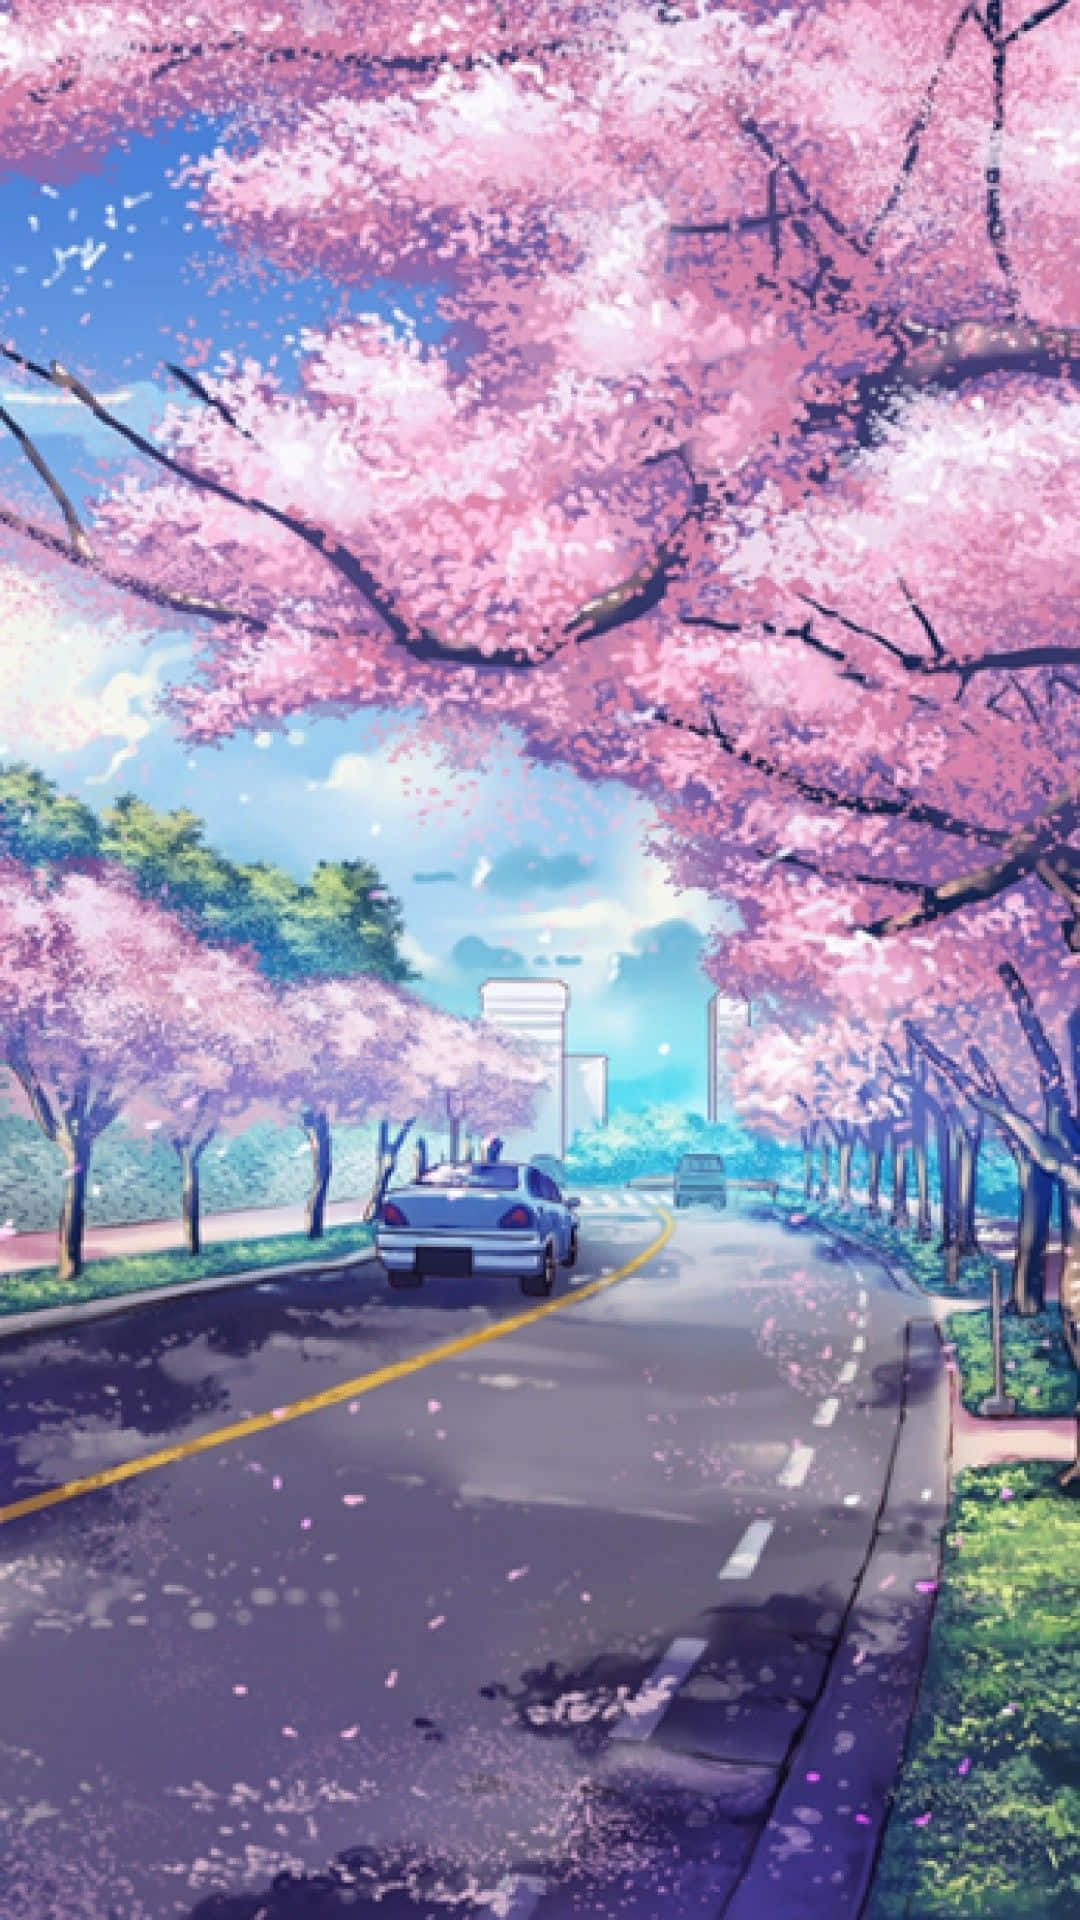 A Pink Road With Cherry Blossoms In The Background